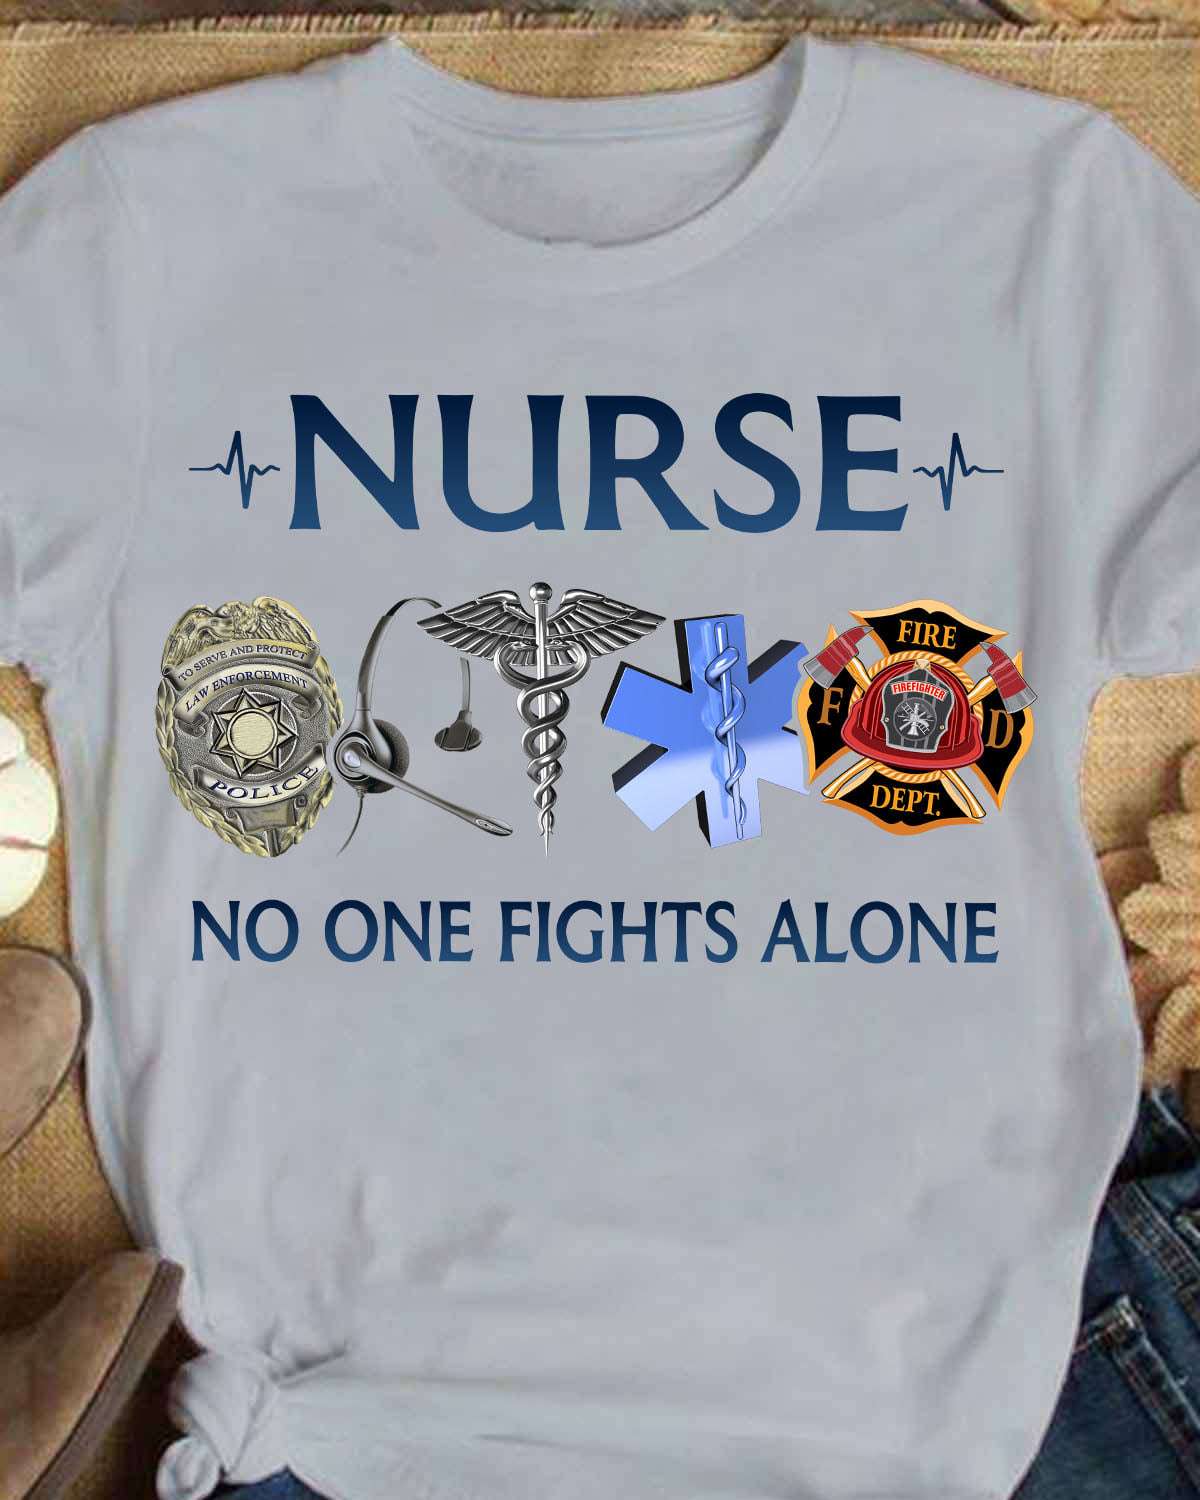 No one fights alone - Nurse the job, police and firefighter, together we fight